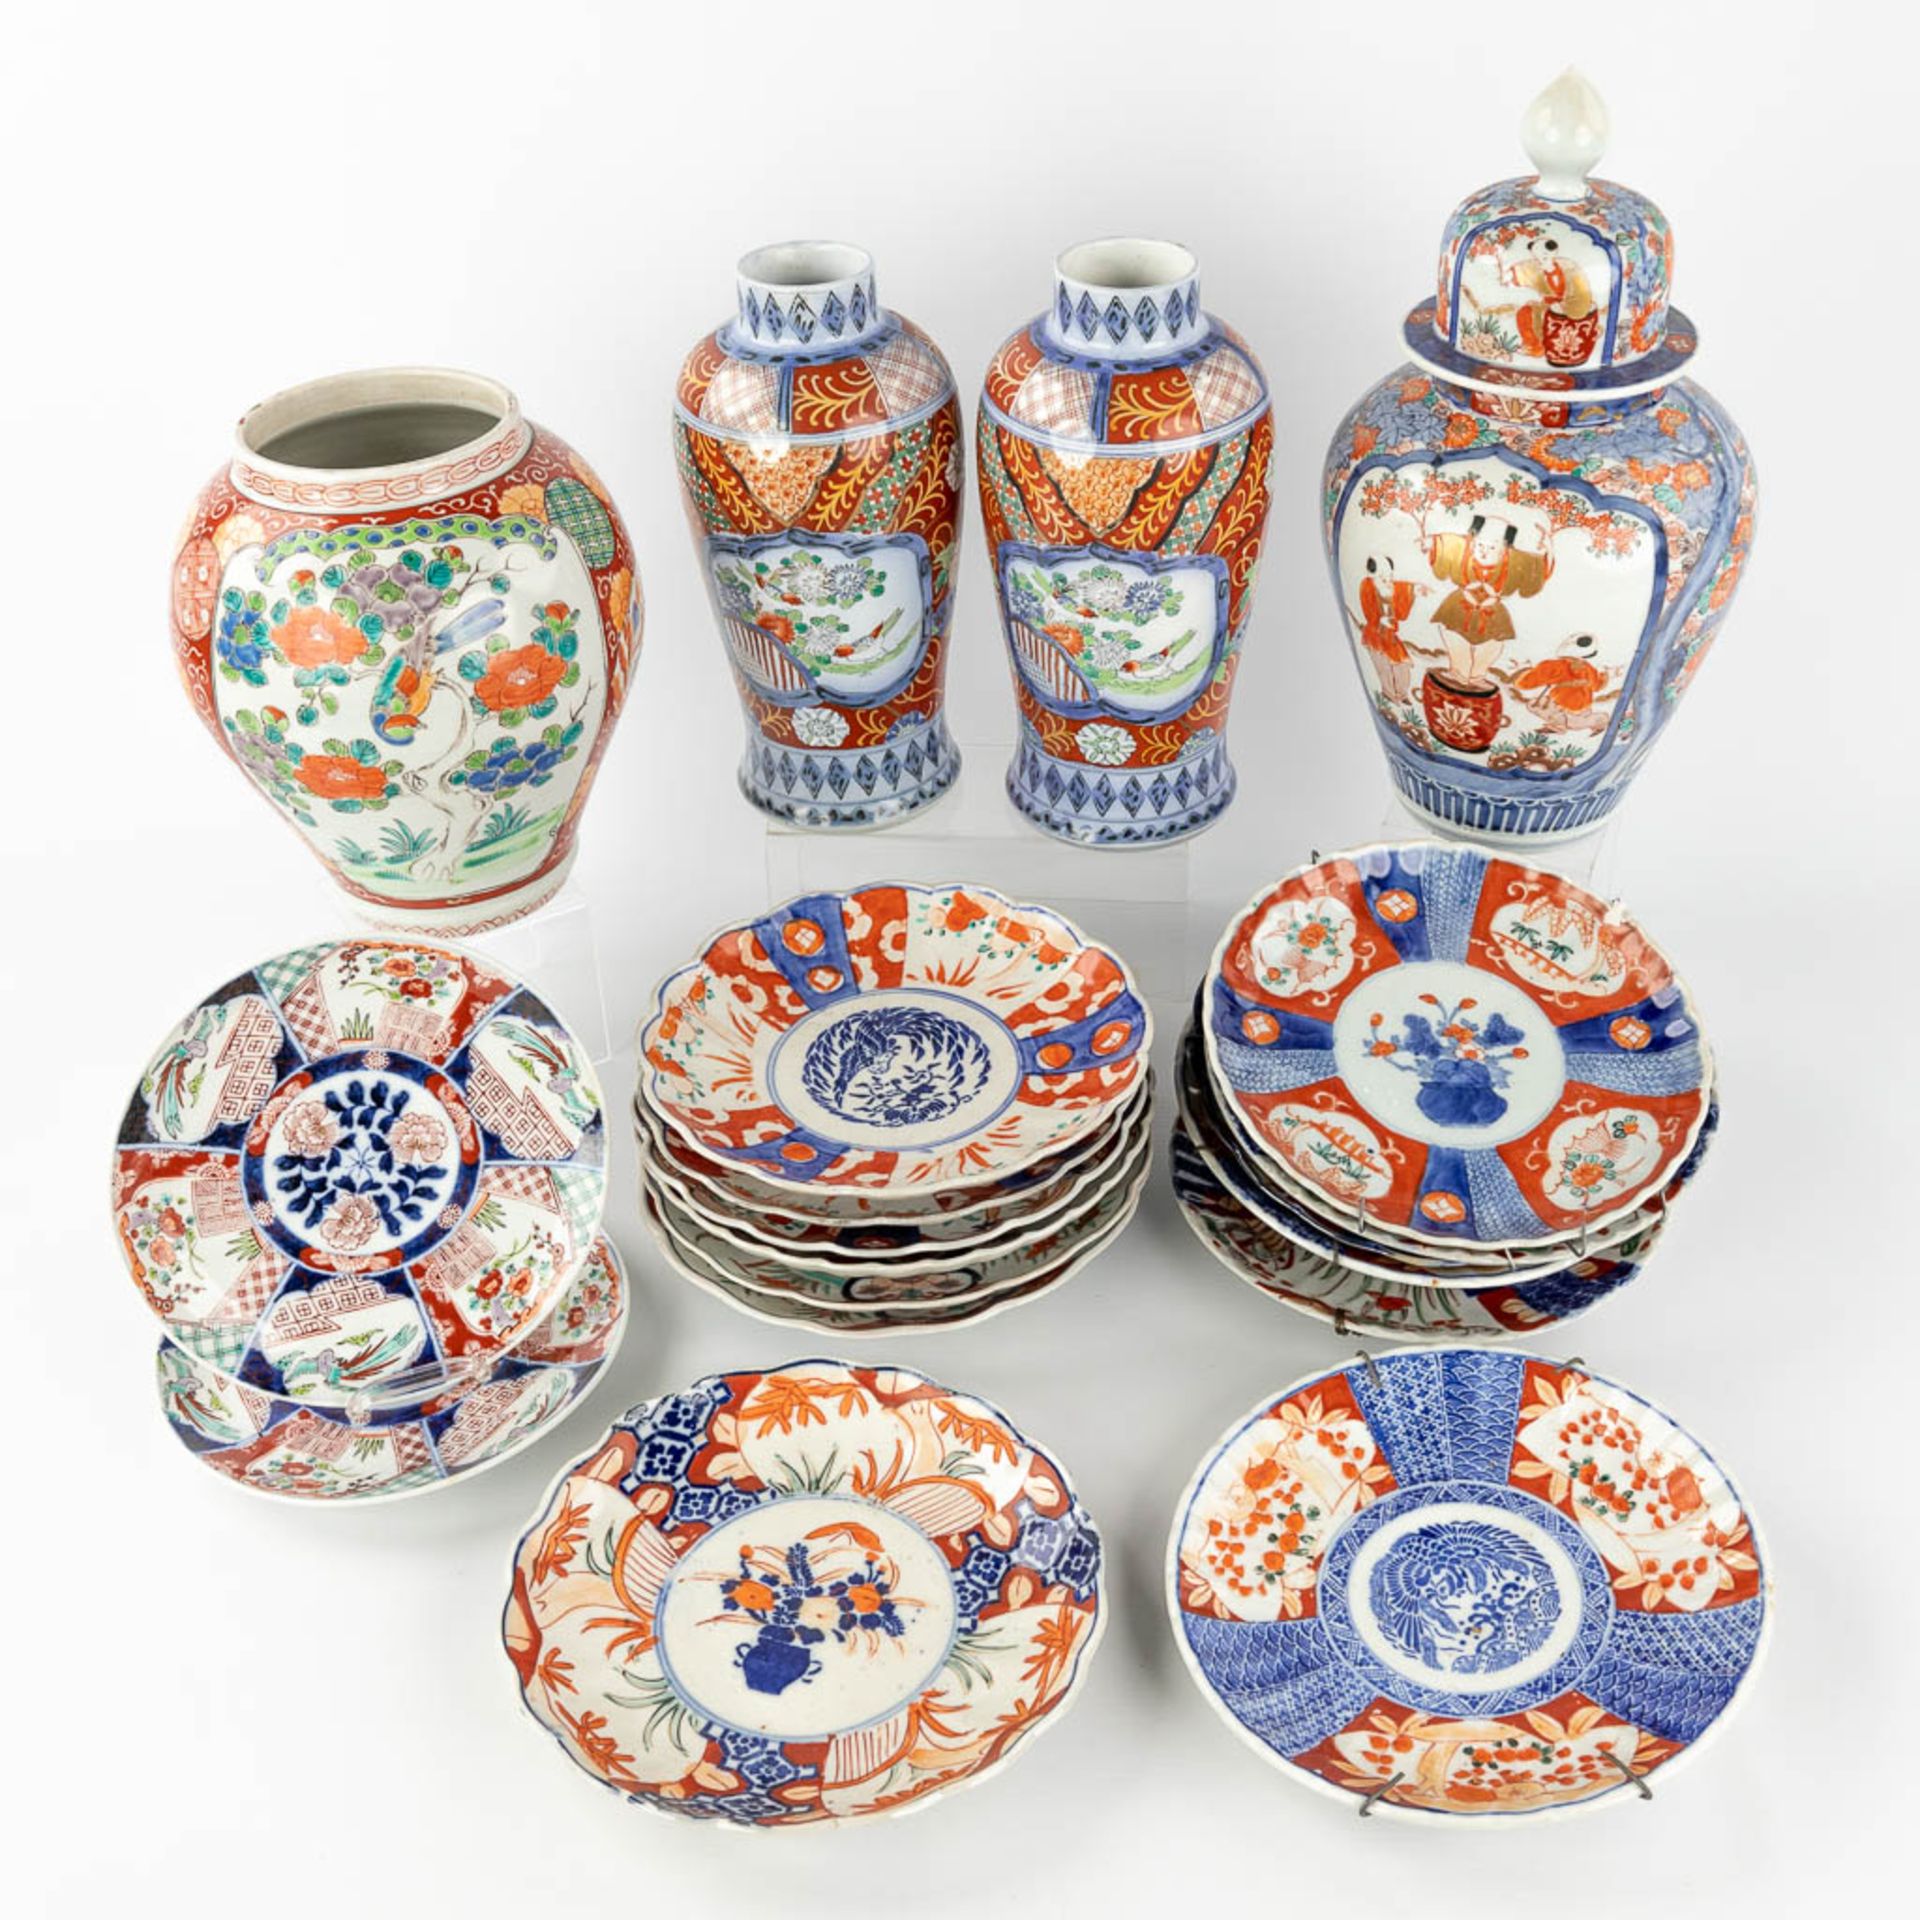 An assembled collection of Japanese Imari and Kutani porcelain. 19th/20th century. (H: 35 x D: 19 cm